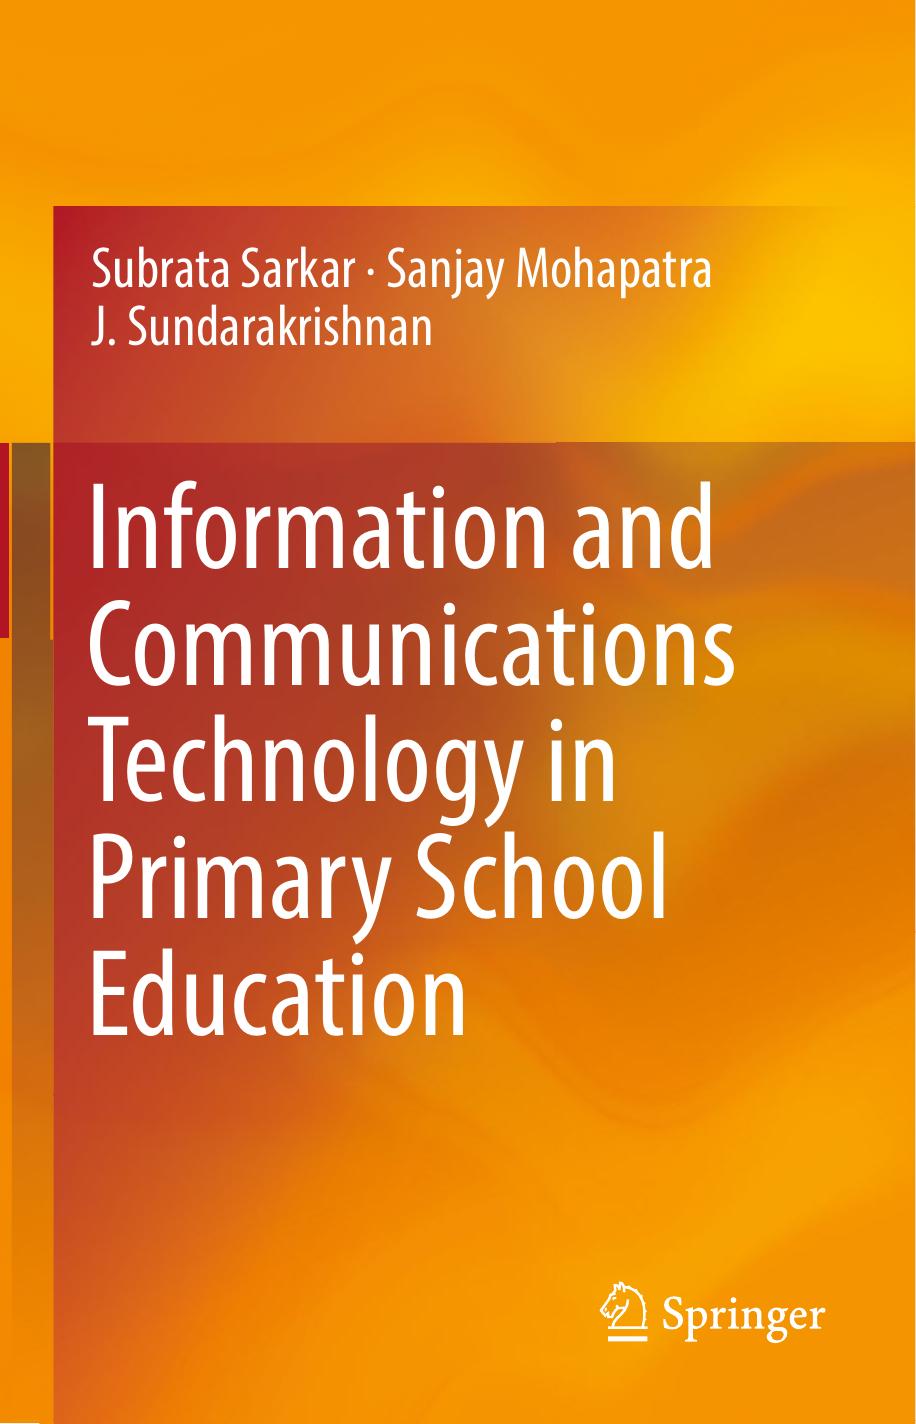 Information and Communications Technology in Primary School Education 2017.pdf